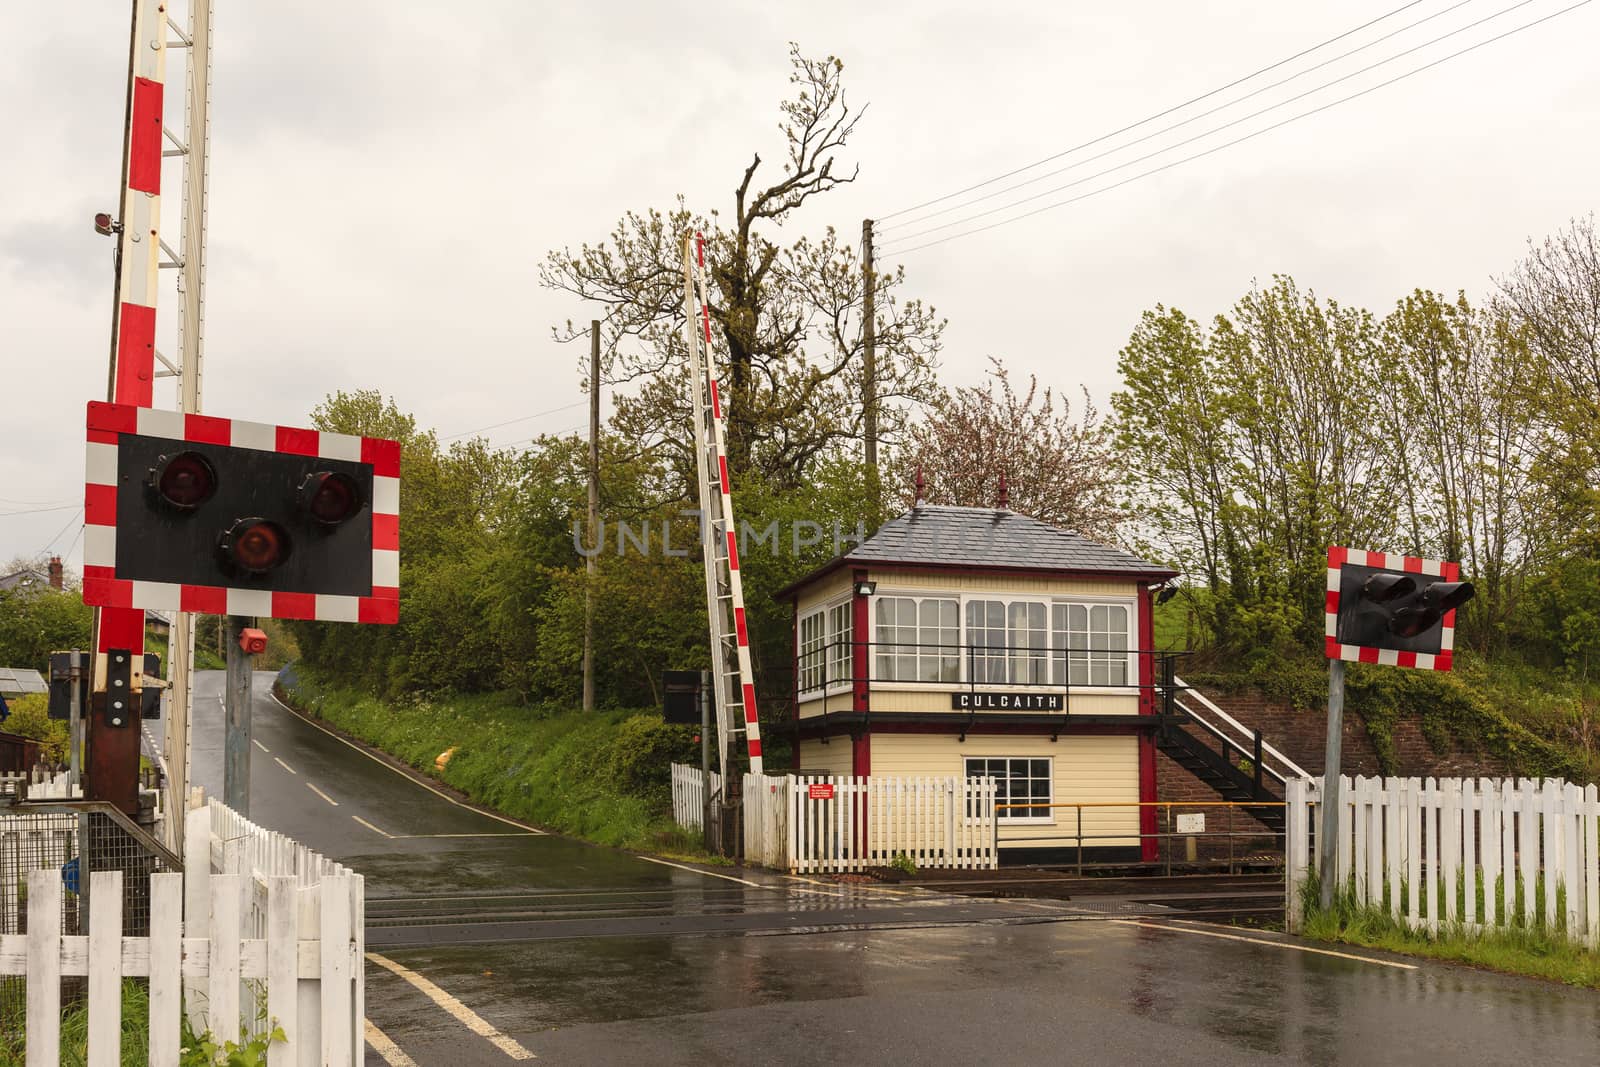 Culgaith Signal Box and Level Crossing by ATGImages